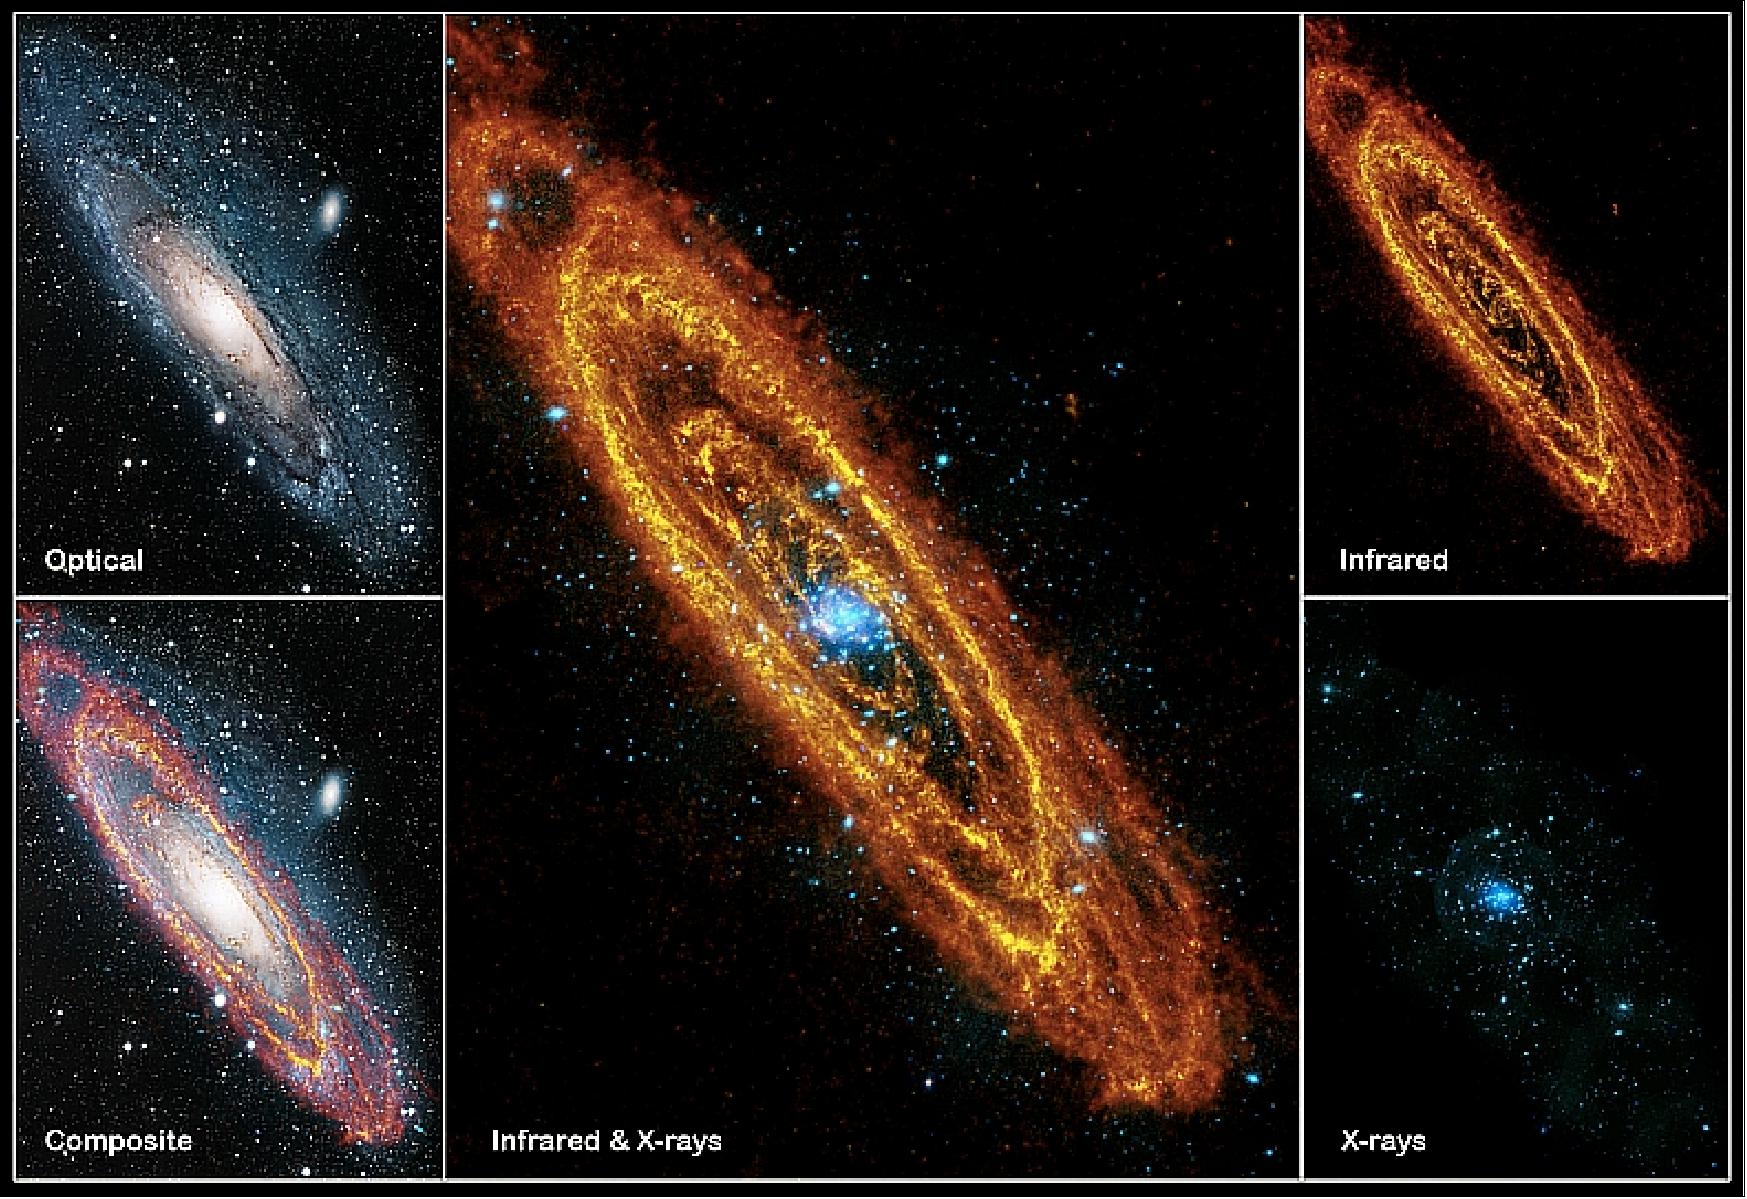 Figure 76: Images of the Andromeda Galaxy taken by the Herschel and XMM-Newton S/C instruments in various spectral ranges (image credit: ESA)